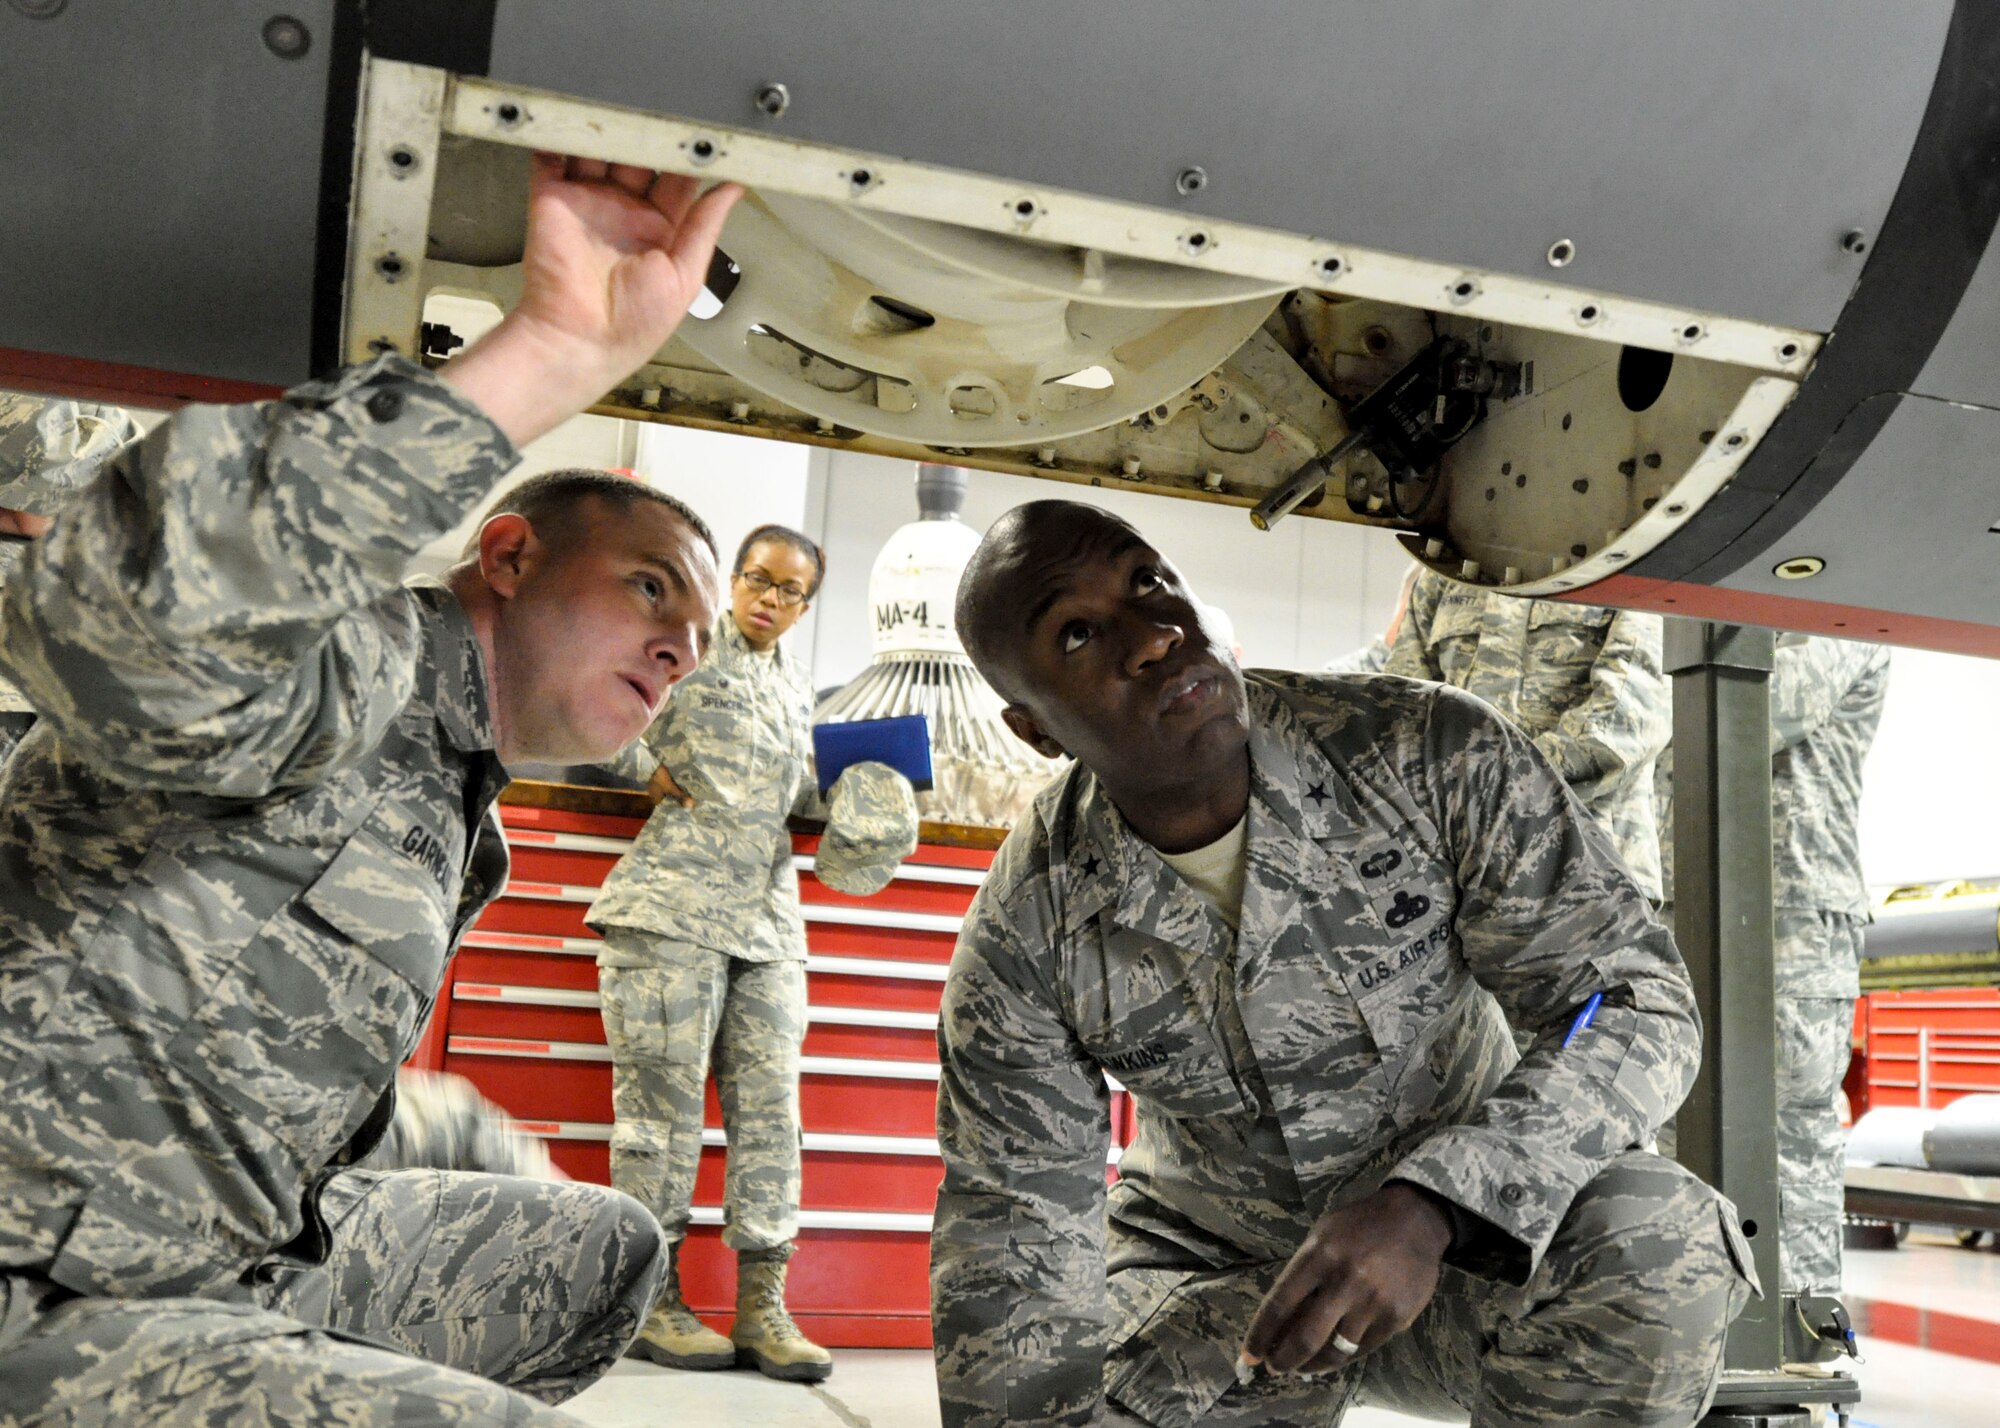 Master Sgt. Dustin Garneau shows Brig. Gen. Stacey Hawkins part of a KC-135 Stratotanker that had been brought in for repair Nov. 7, 2016, at Fairchild Air Force Base, Wash. Hawkins is the Air Mobility Command director of logistics, engineering and force protection, his visit included a tour of the hydraulics shop from Garneau, who is the 92nd Maintenance Squadron NCO in charge of aircraft hydraulics. (U.S. Air Force photo/Airman 1st Class Taylor Shelton)